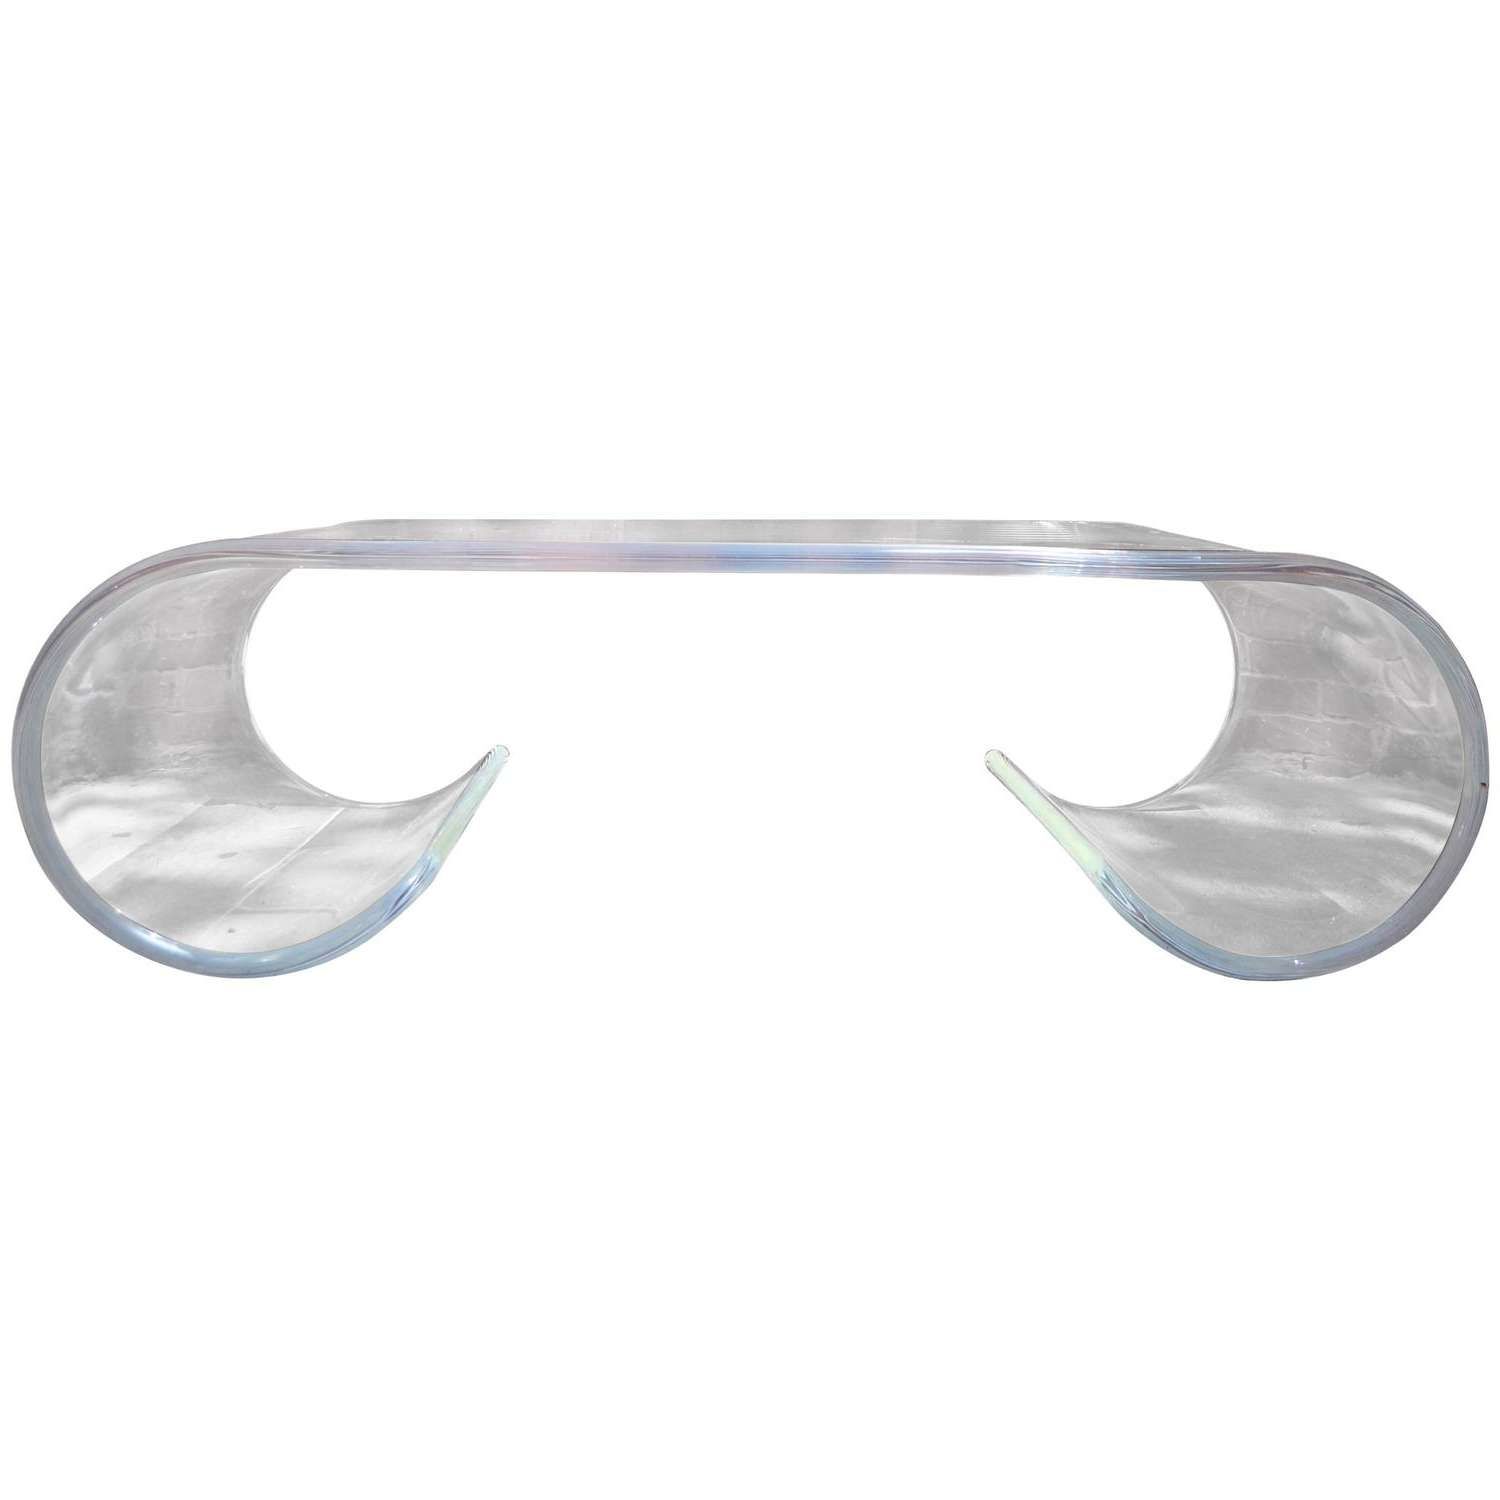 Large Exceptional Scroll Lucite Coffee Table For Sale At 1stdibs In Latest Perspex Coffee Table (View 9 of 20)